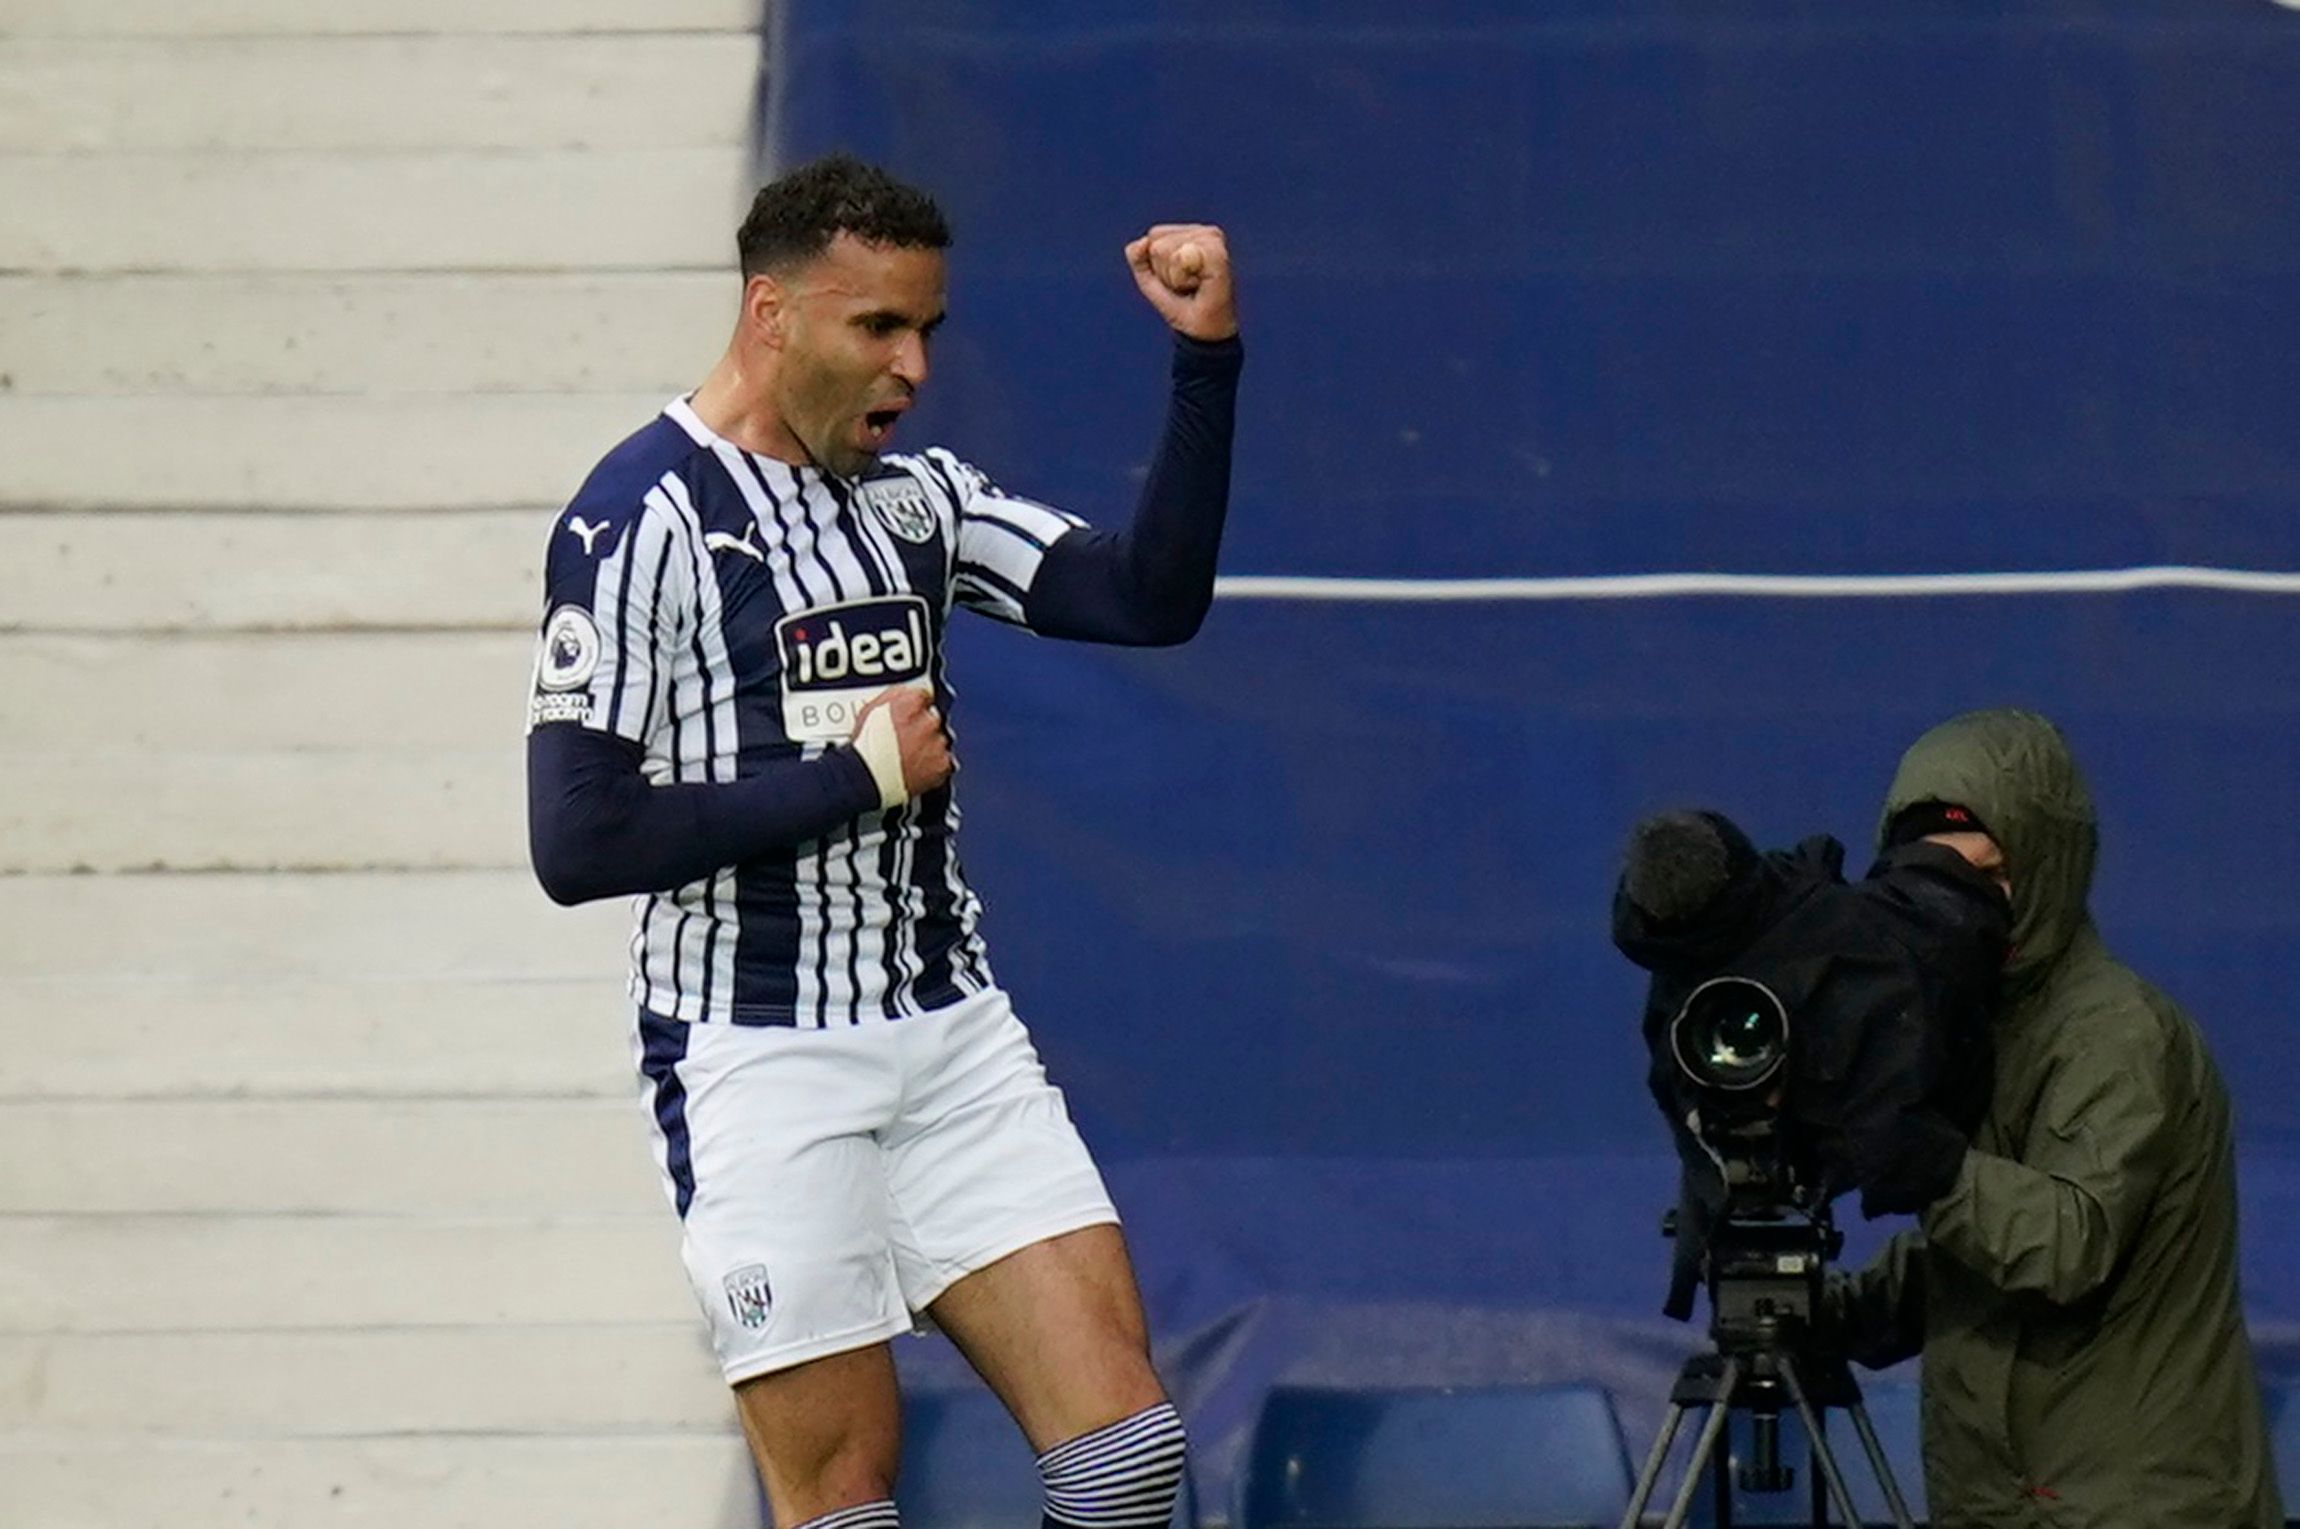 Soccer Football - Premier League - West Bromwich Albion v Liverpool - The Hawthorns, West Bromwich, Britain - May 16, 2021 West Bromwich Albion's Hal Robson-Kanu celebrates scoring their first goal Pool via REUTERS/Tim Keeton EDITORIAL USE ONLY. No use with unauthorized audio, video, data, fixture lists, club/league logos or 'live' services. Online in-match use limited to 75 images, no video emulation. No use in betting, games or single club /league/player publications.  Please contact your acco